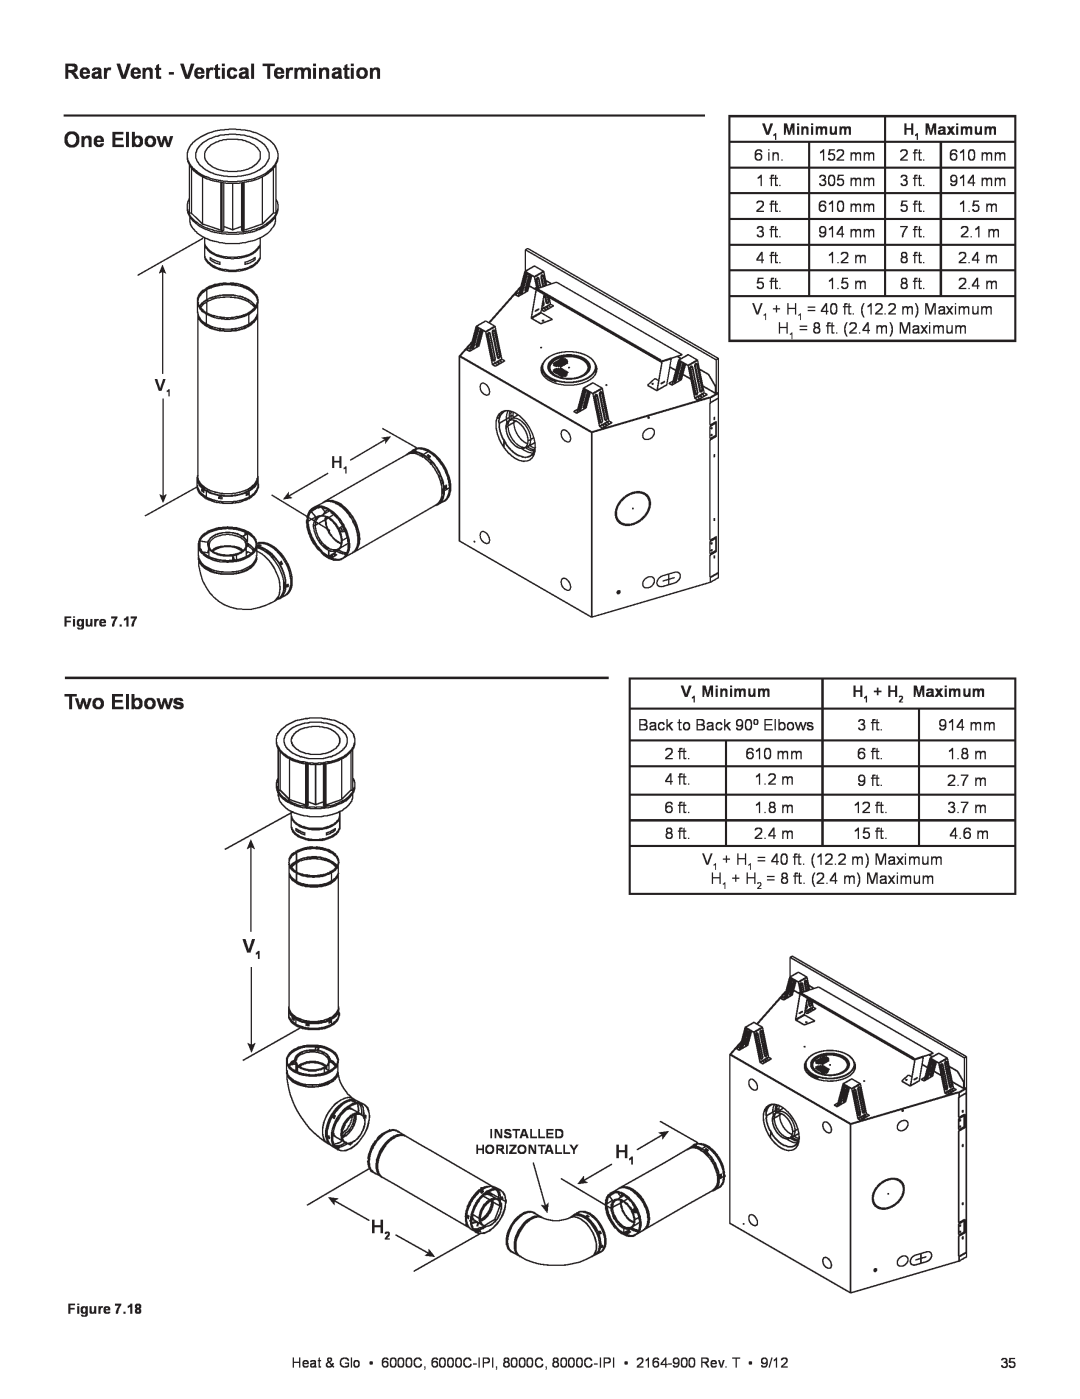 Heat & Glo LifeStyle 6000C manual Rear Vent - Vertical Termination One Elbow, Two Elbows, V1 H1 